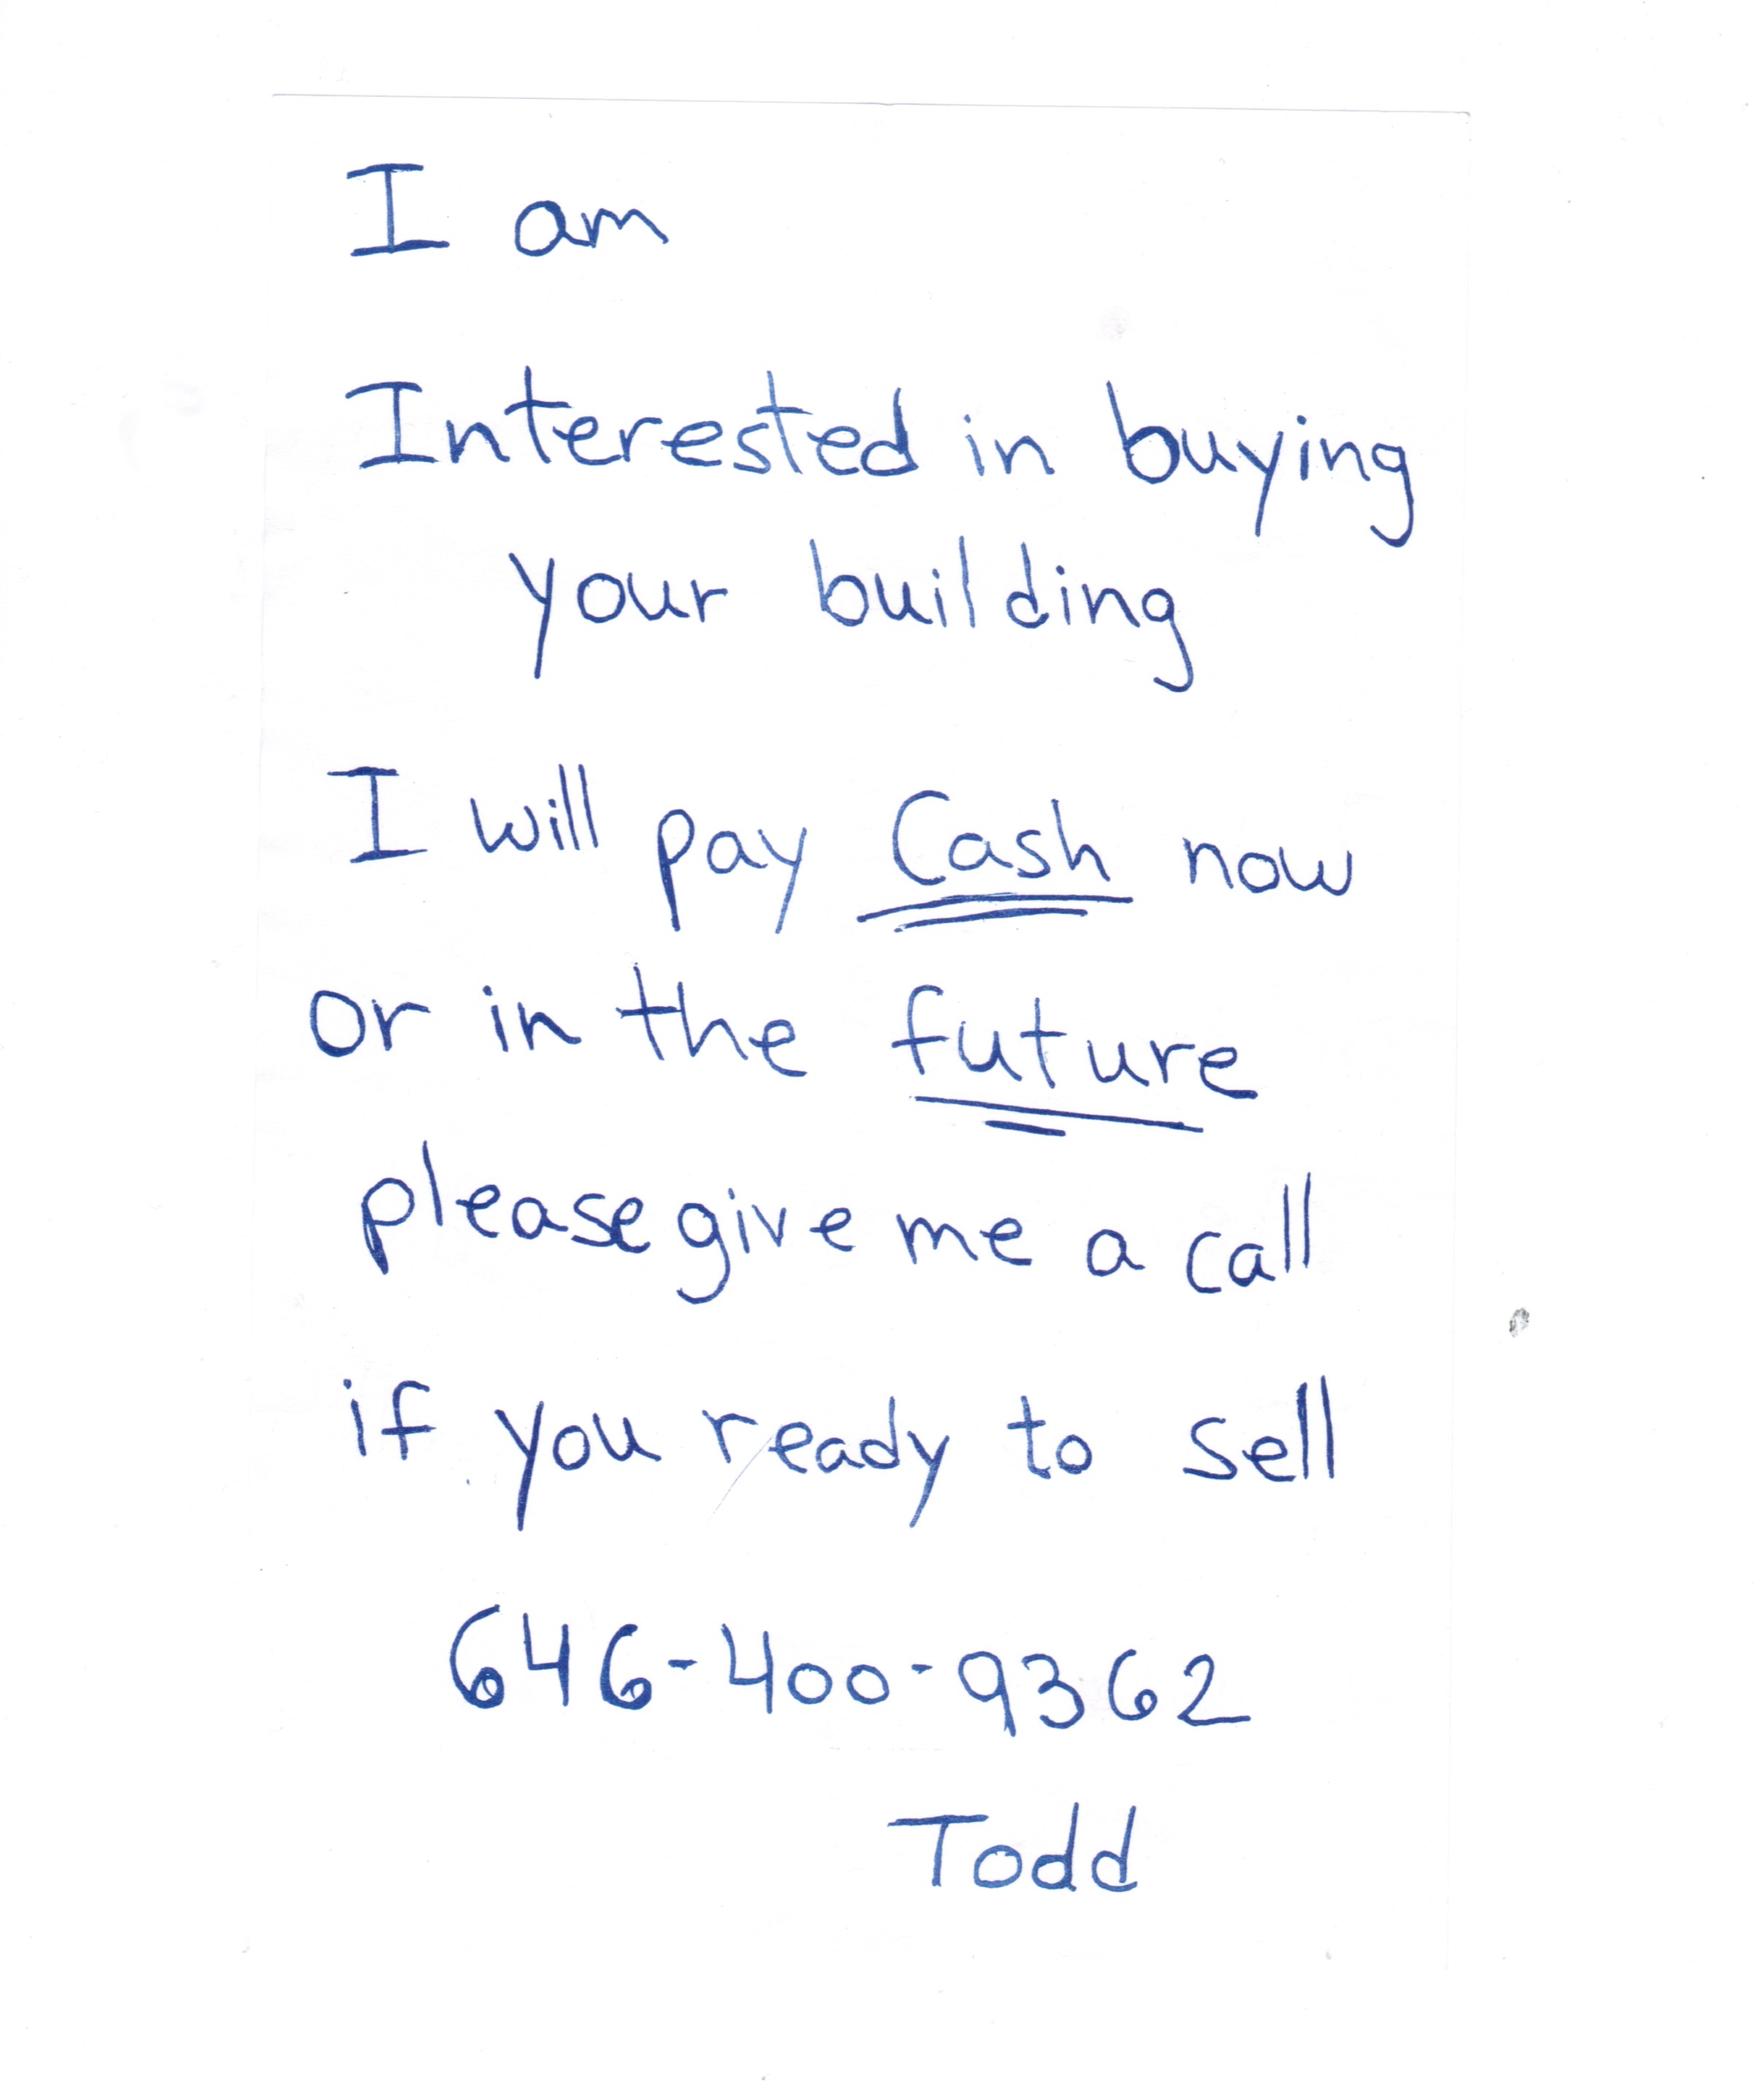 todds-note-sell-building